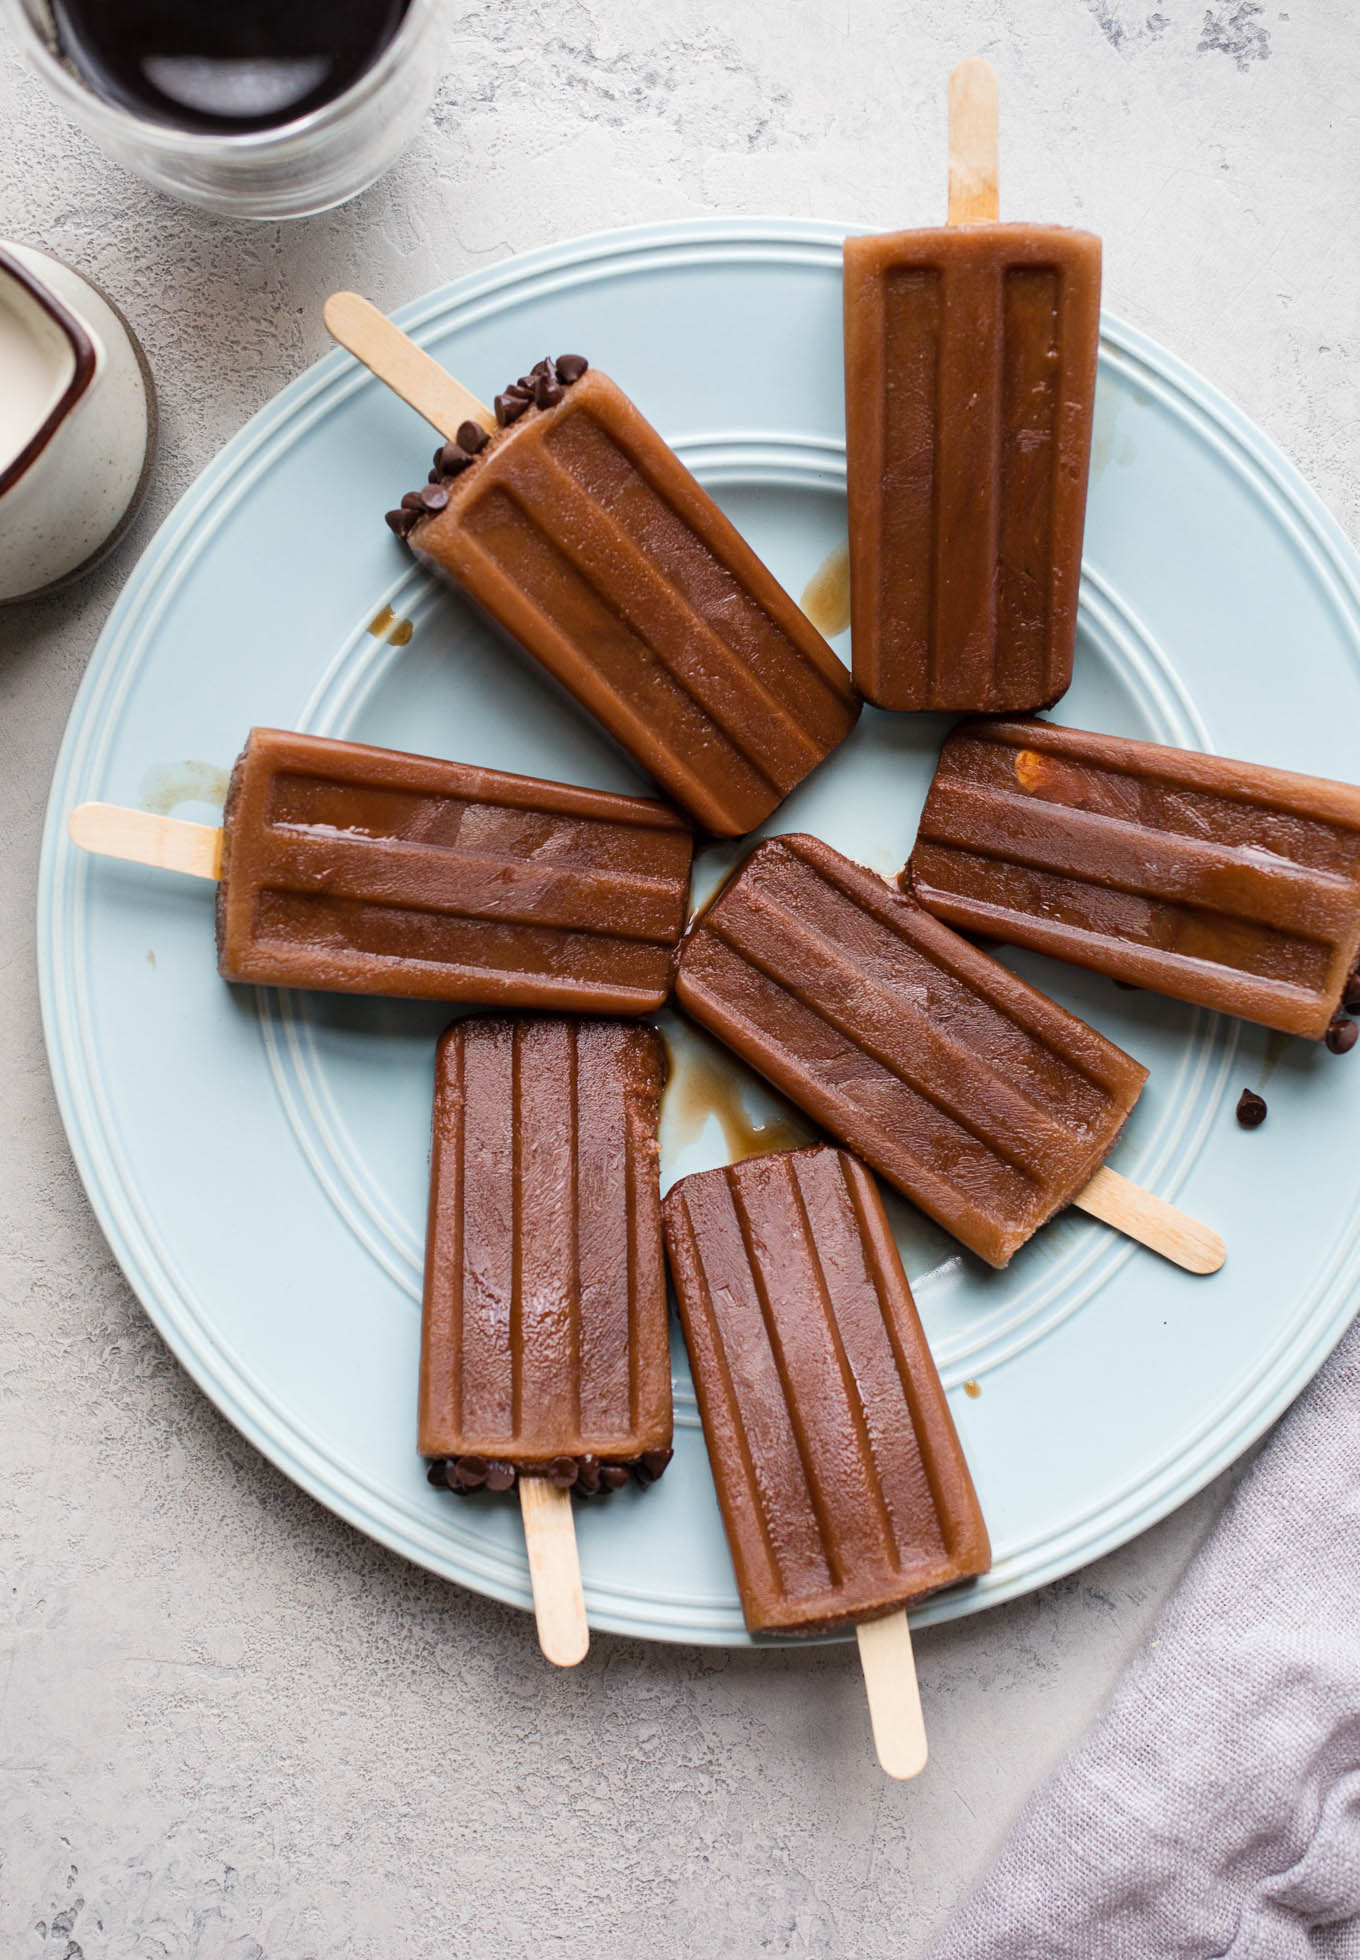 Mocha Iced Coffee Popsicles combine unsweetened cocoa powder, coffee, and almond milk, and honey for cool and creamy frozen treat.